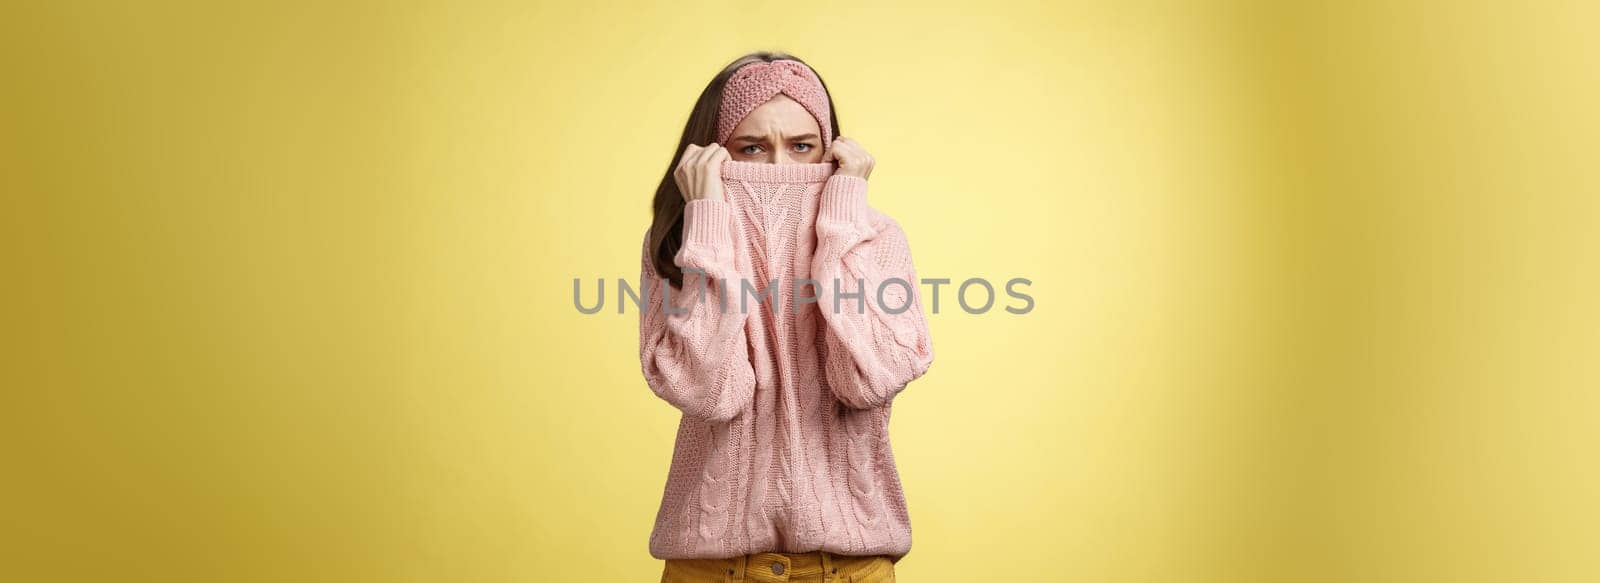 Sad silly, gloomy cute young girl hiding face in sweater collar pulling clothes on nose frowning displeased, unhappy, looking indignant and reluctant standing disappointed over yellow background.